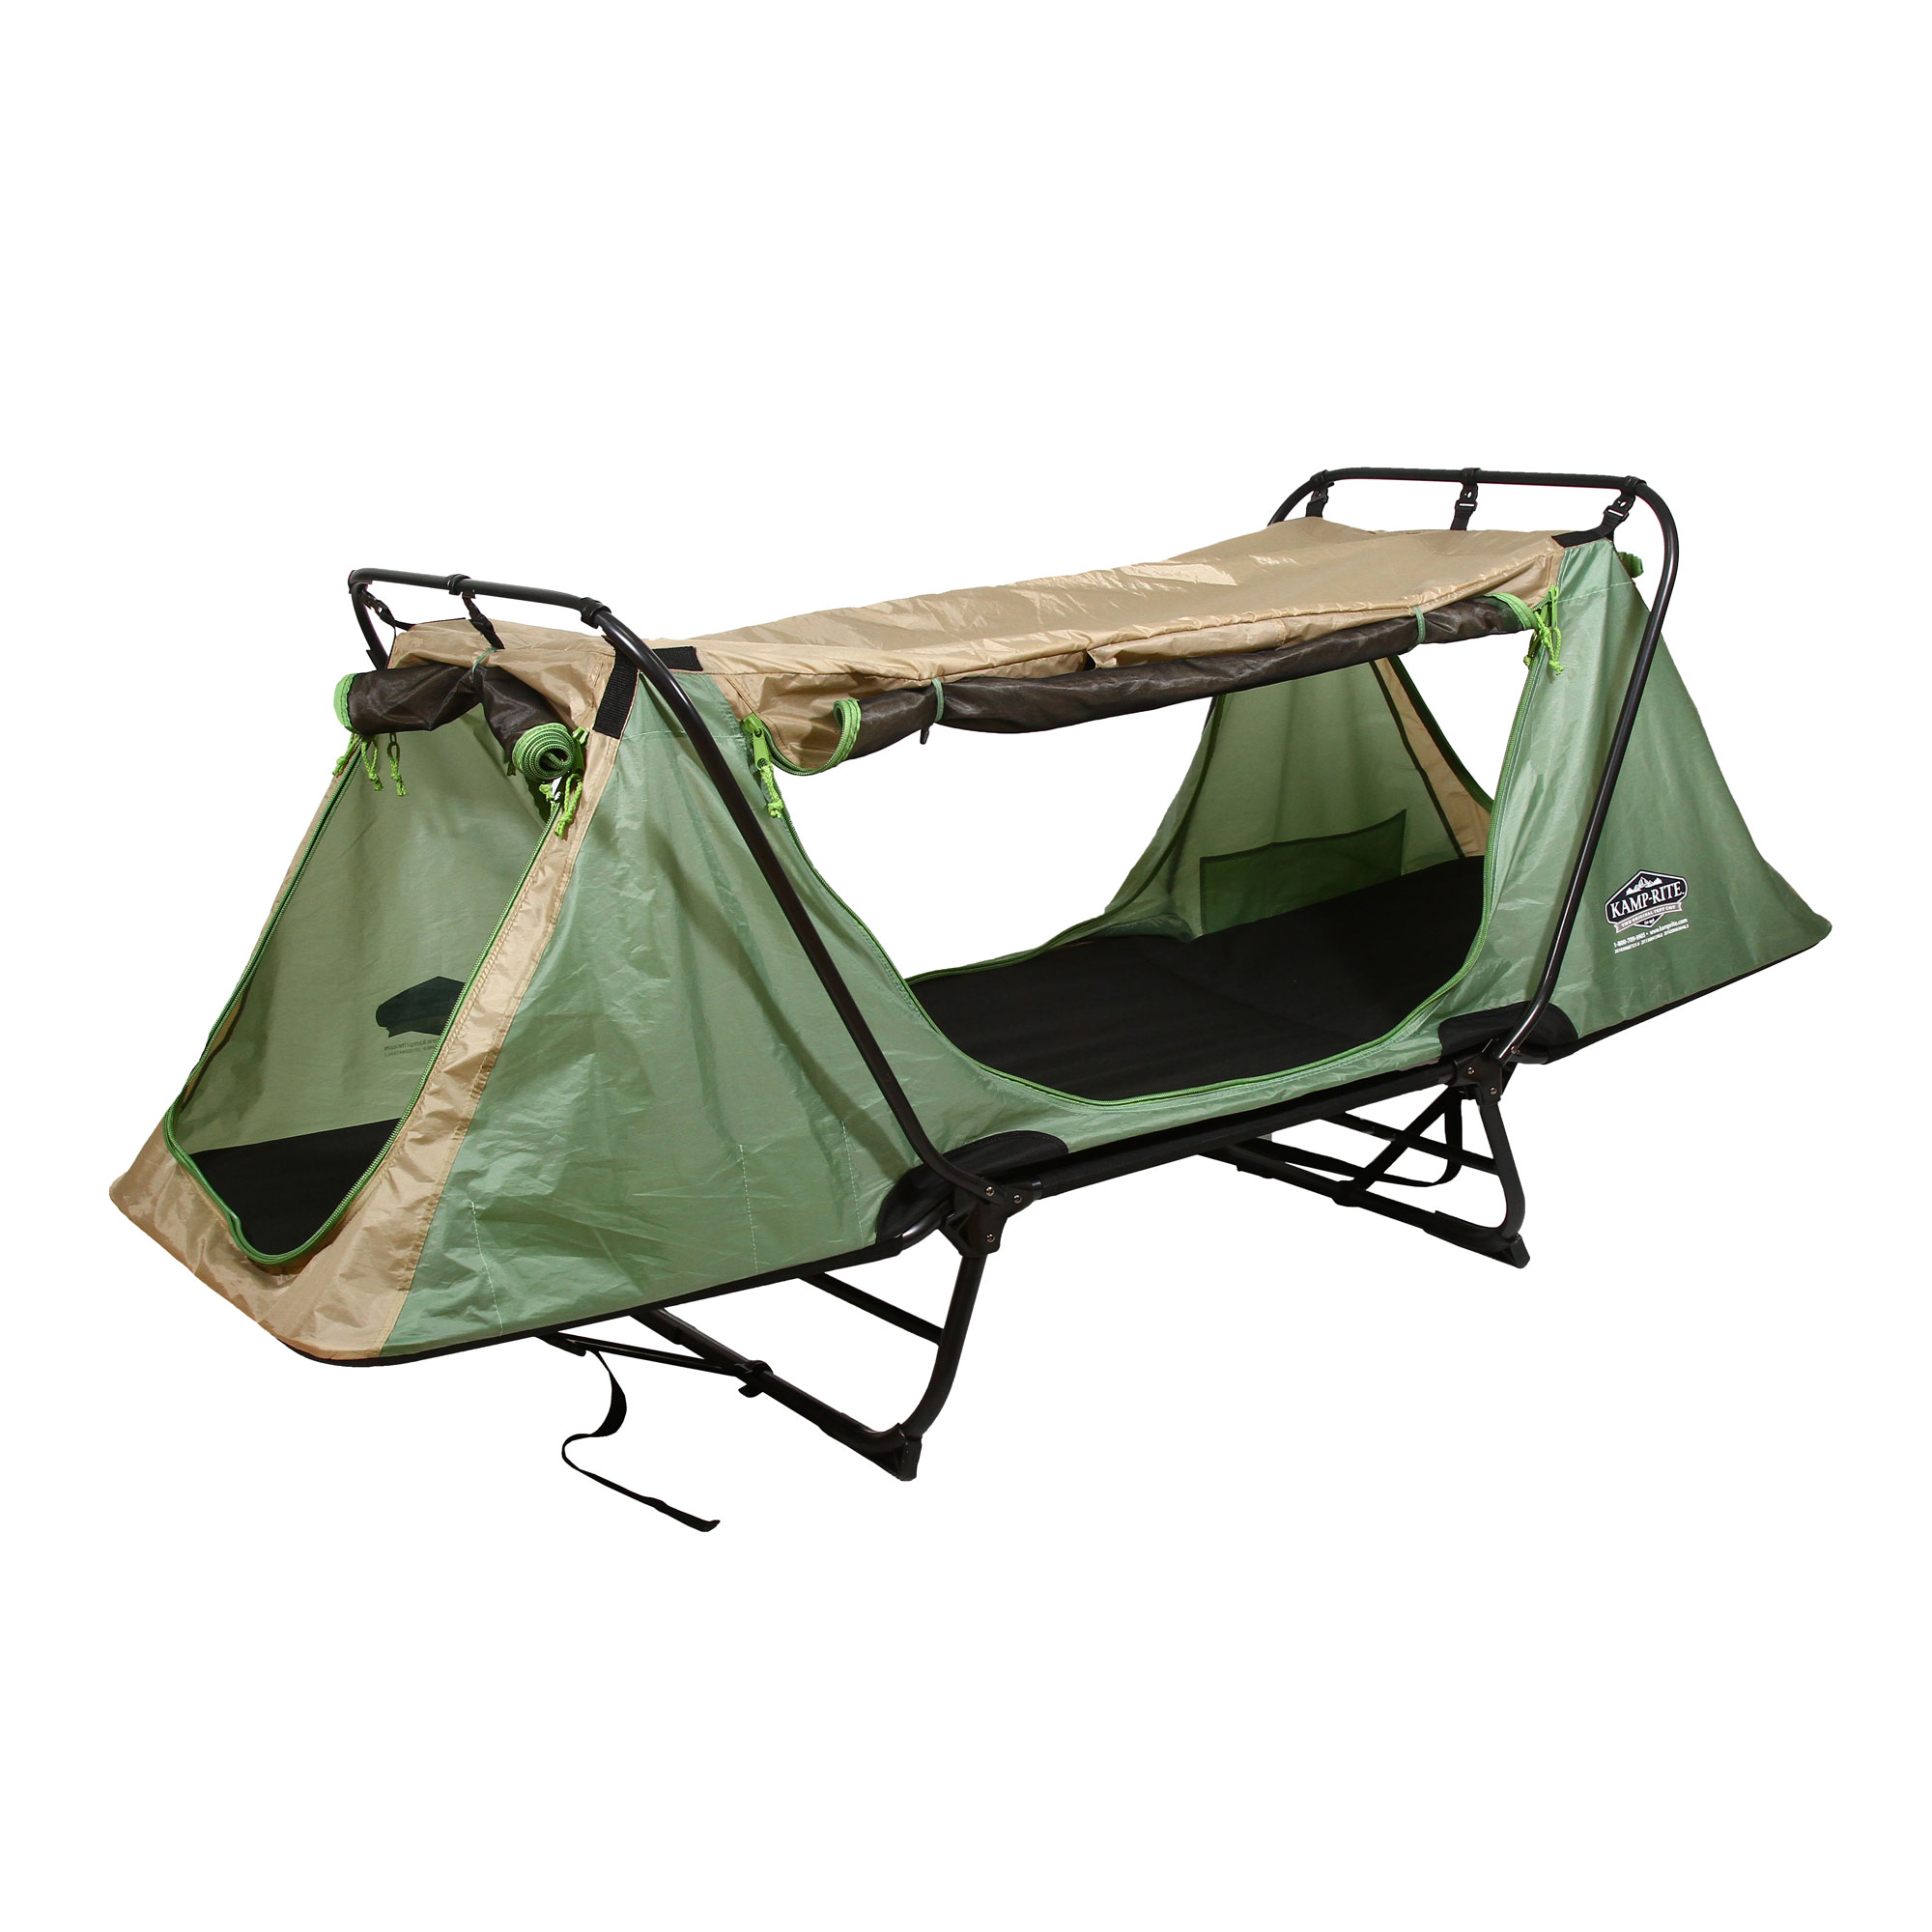 Kamp-Rite Original Tent Cot Folding Camping and Hiking Bed 1 Person (Open Box) - image 2 of 9